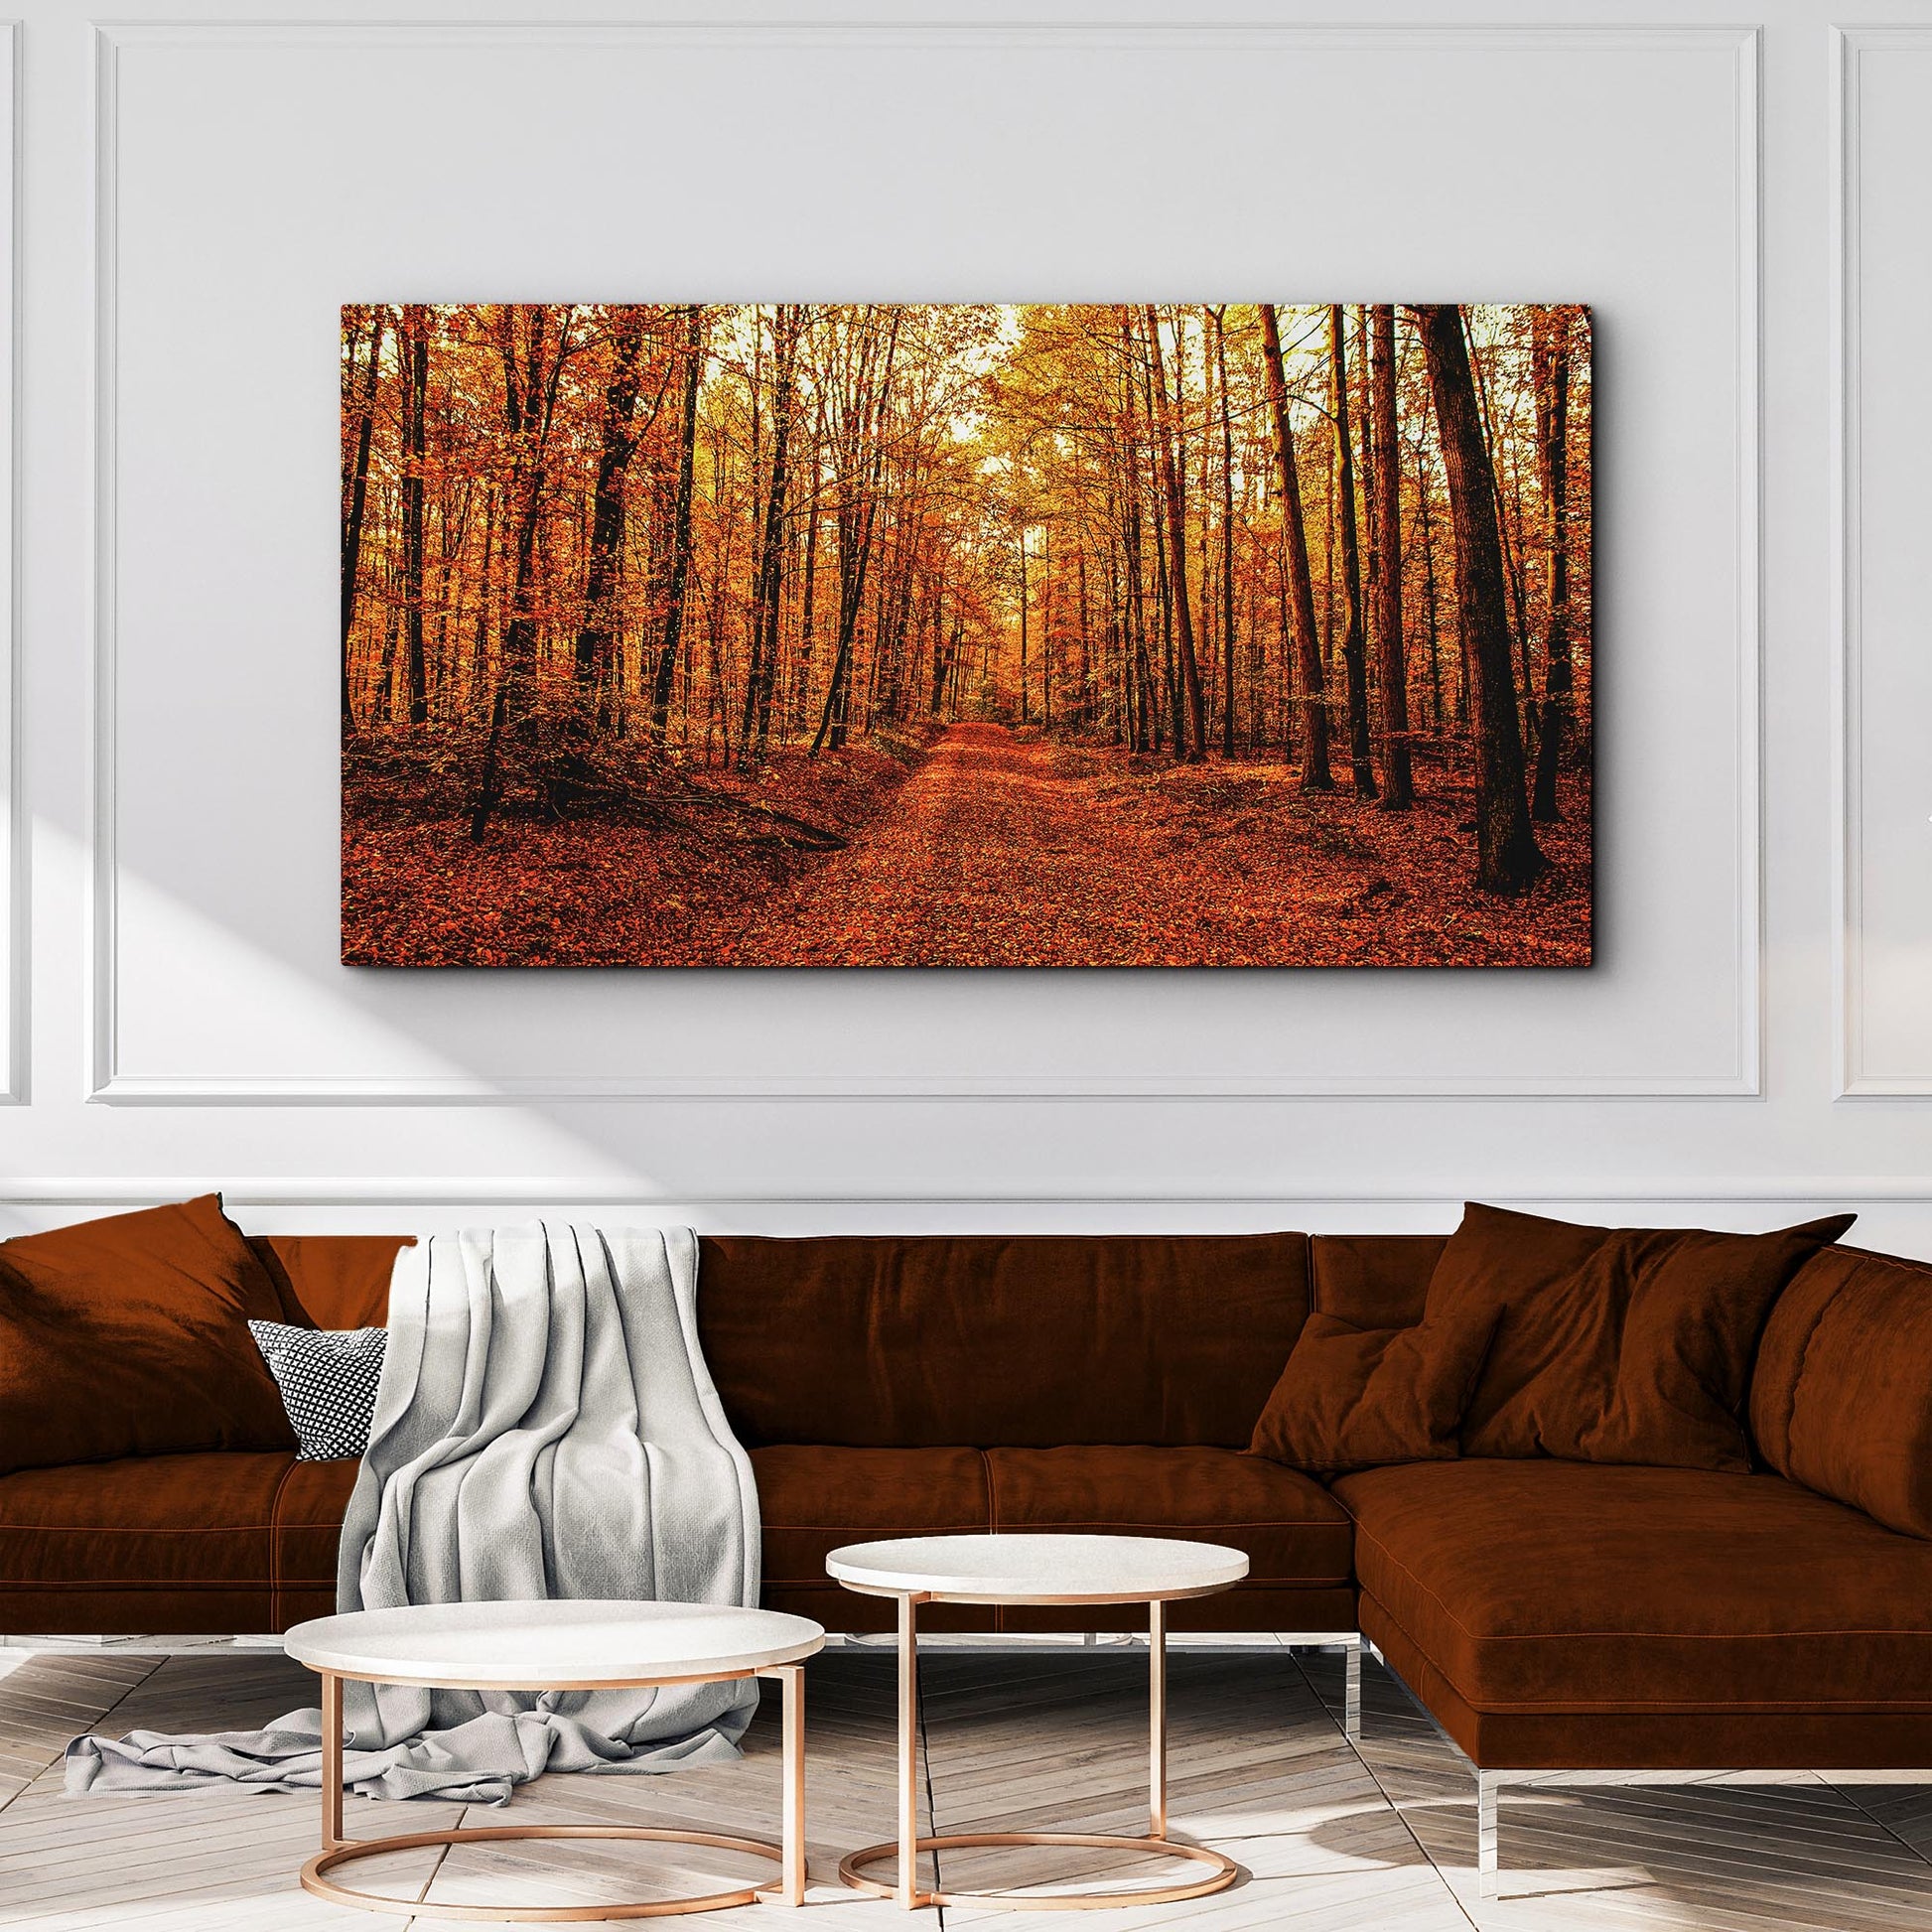 Autumn Tree Forest Canvas Wall Art Style 2 - Image by Tailored Canvases